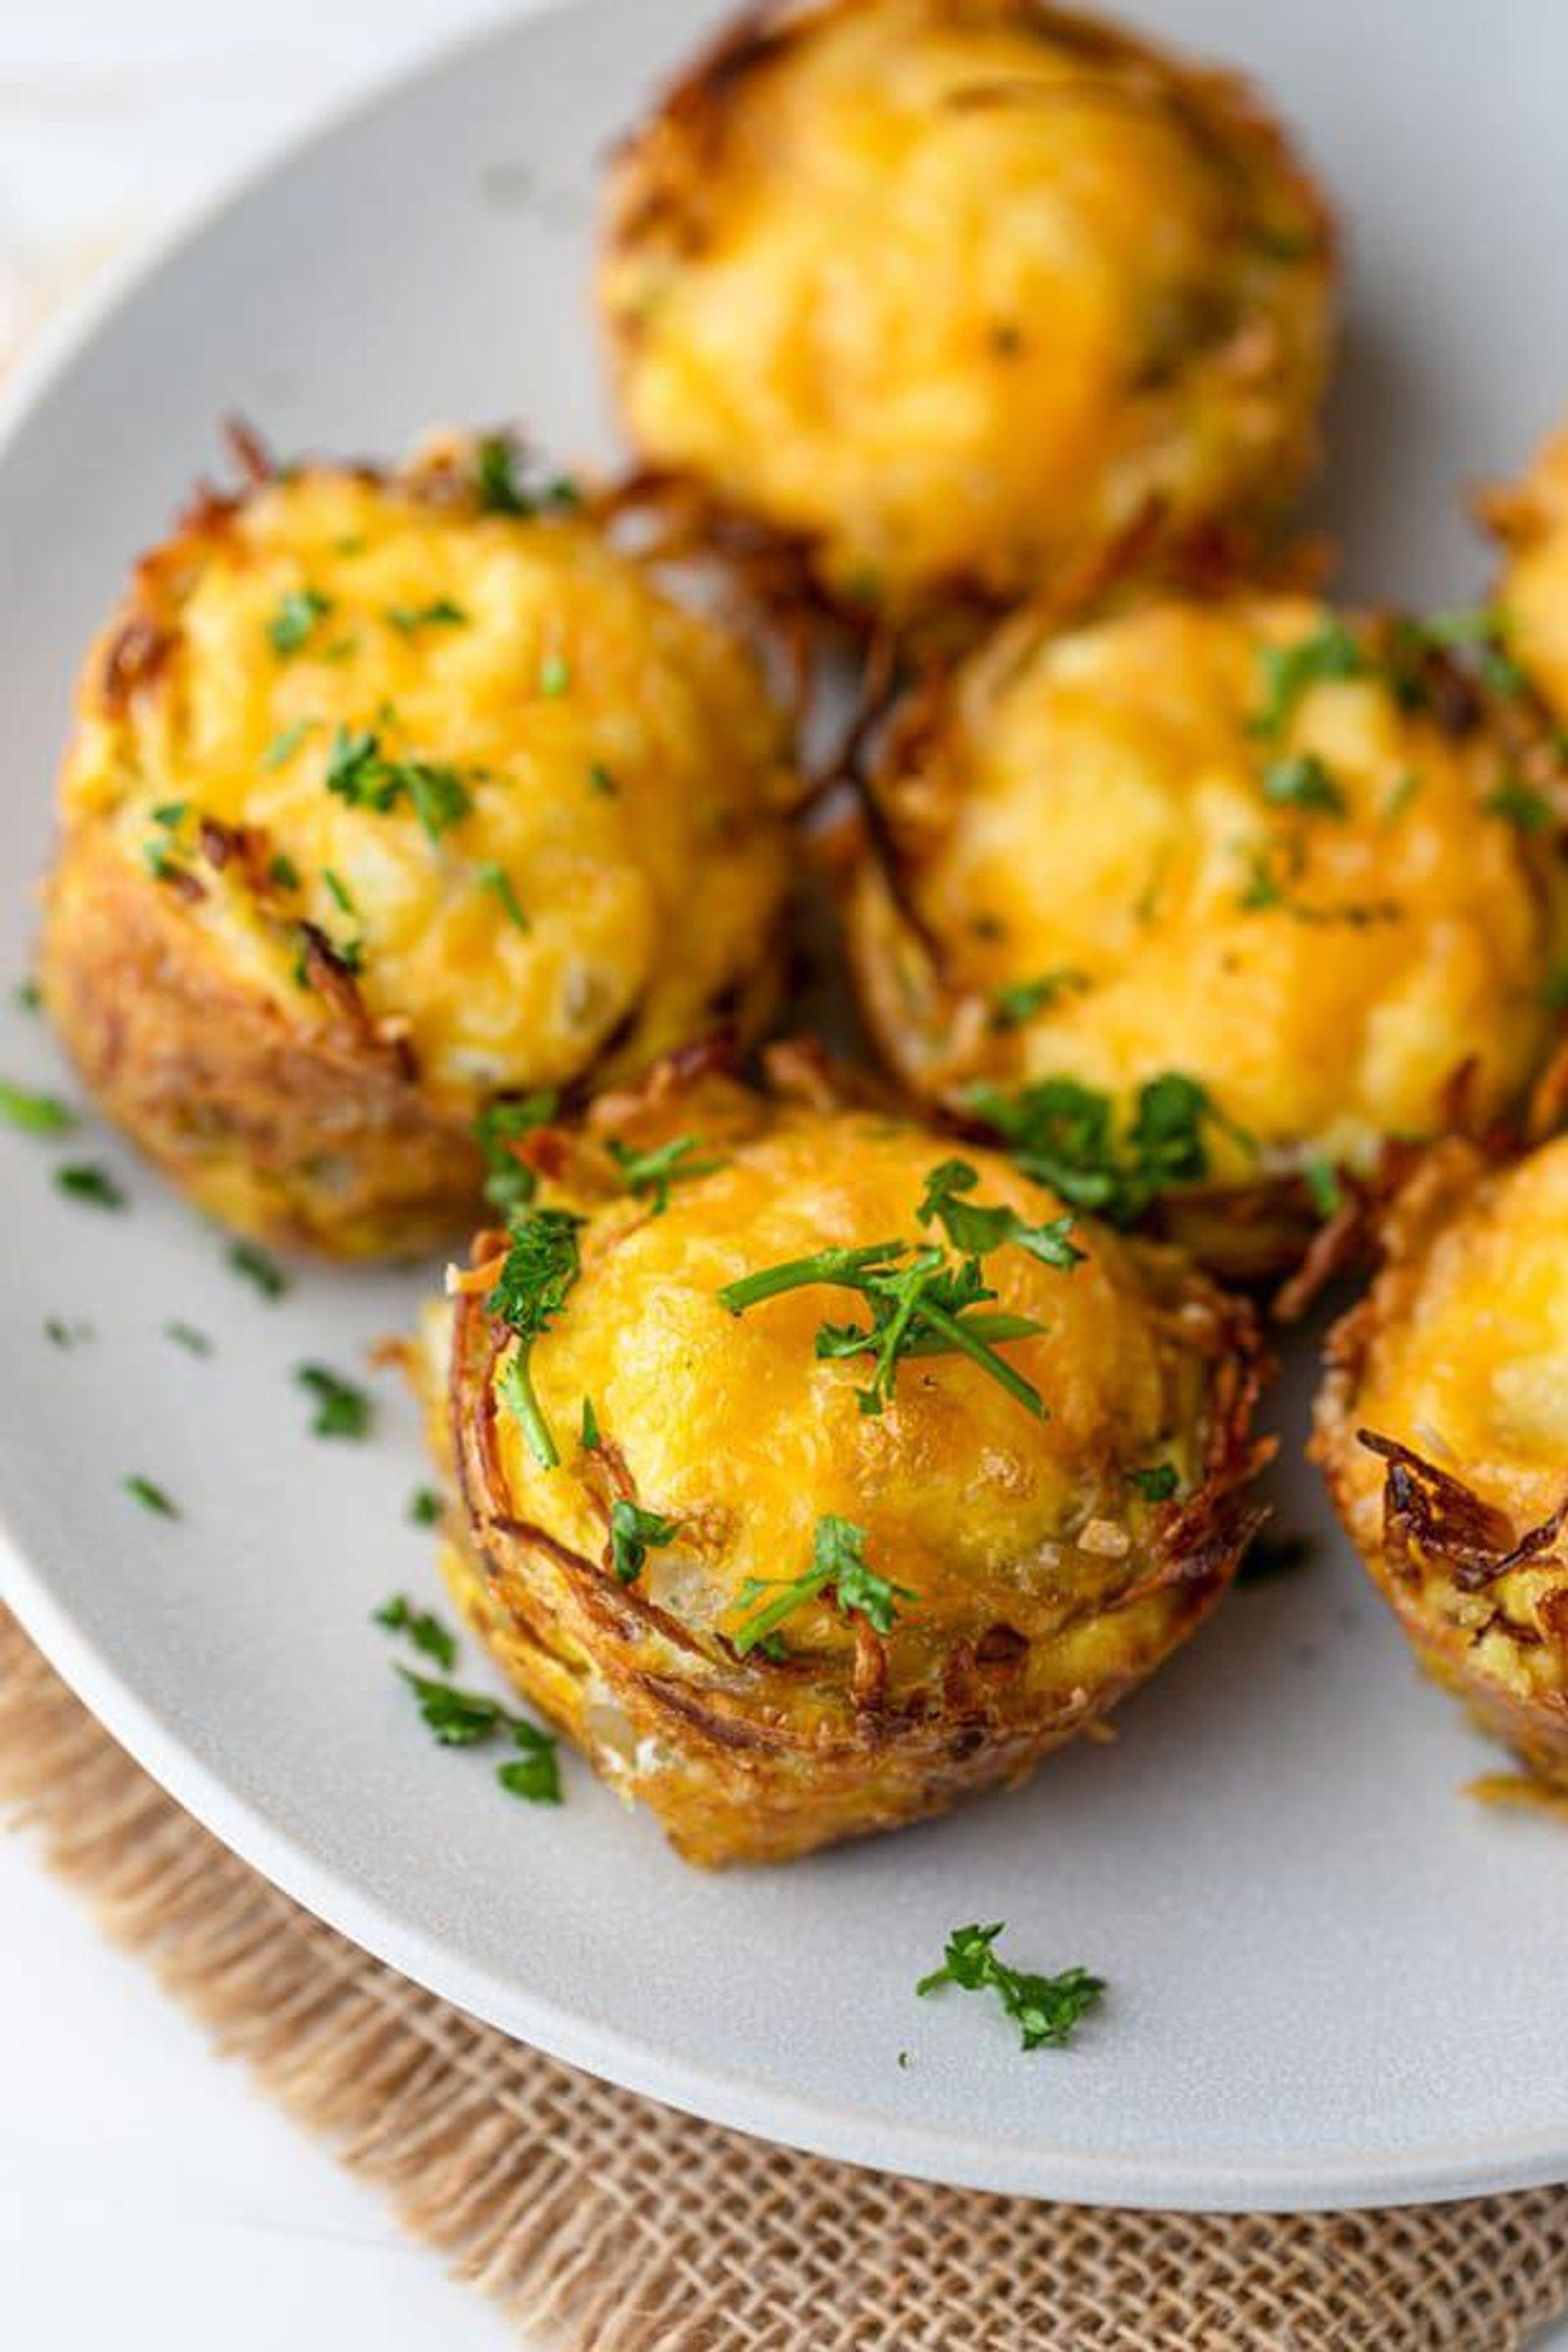 We're kind of in love with these bites. And the best part may just be those hash browns. Top these eggs cups with hot sauce and diced avocado, if you know what's good for you. (via Feel Good Foodie)